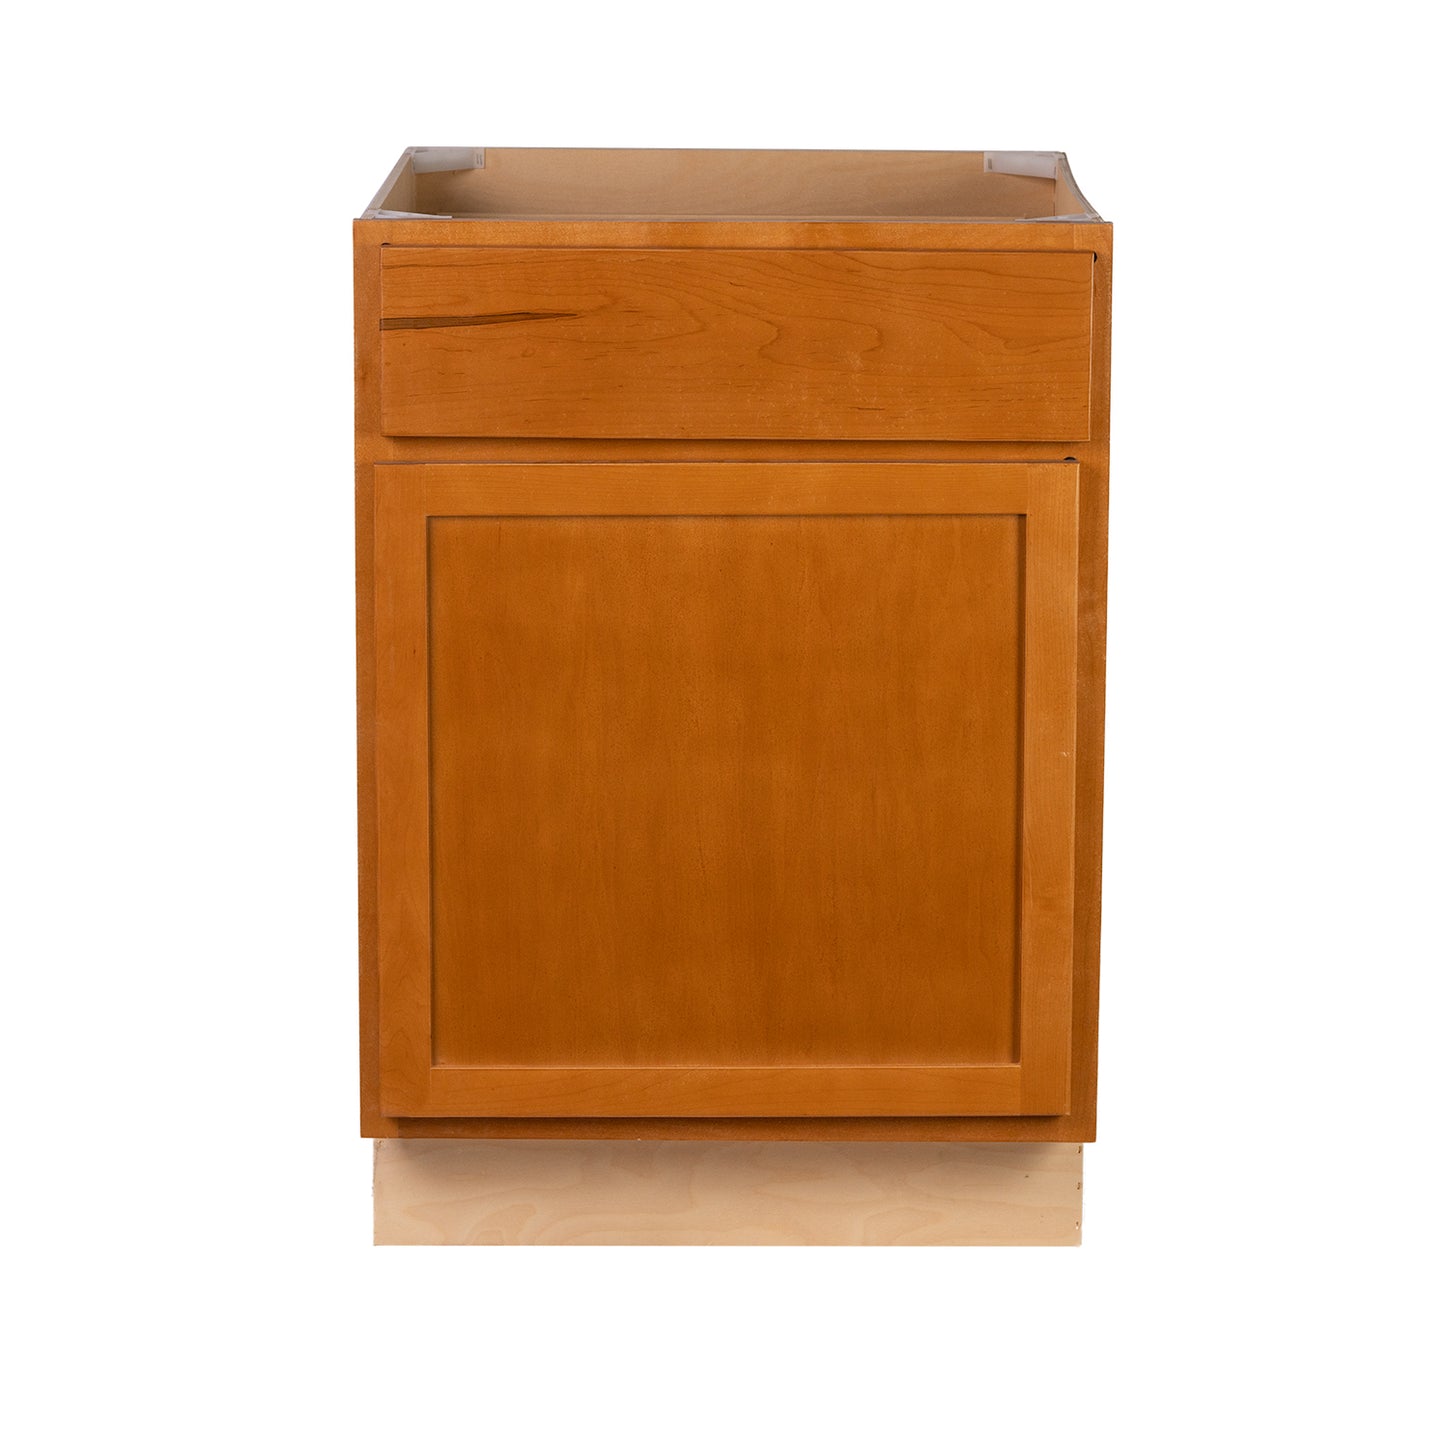 Quicklock RTA (Ready-to-Assemble) Provincial Stain Base Cabinet | 15"Wx34.5"Hx24"D